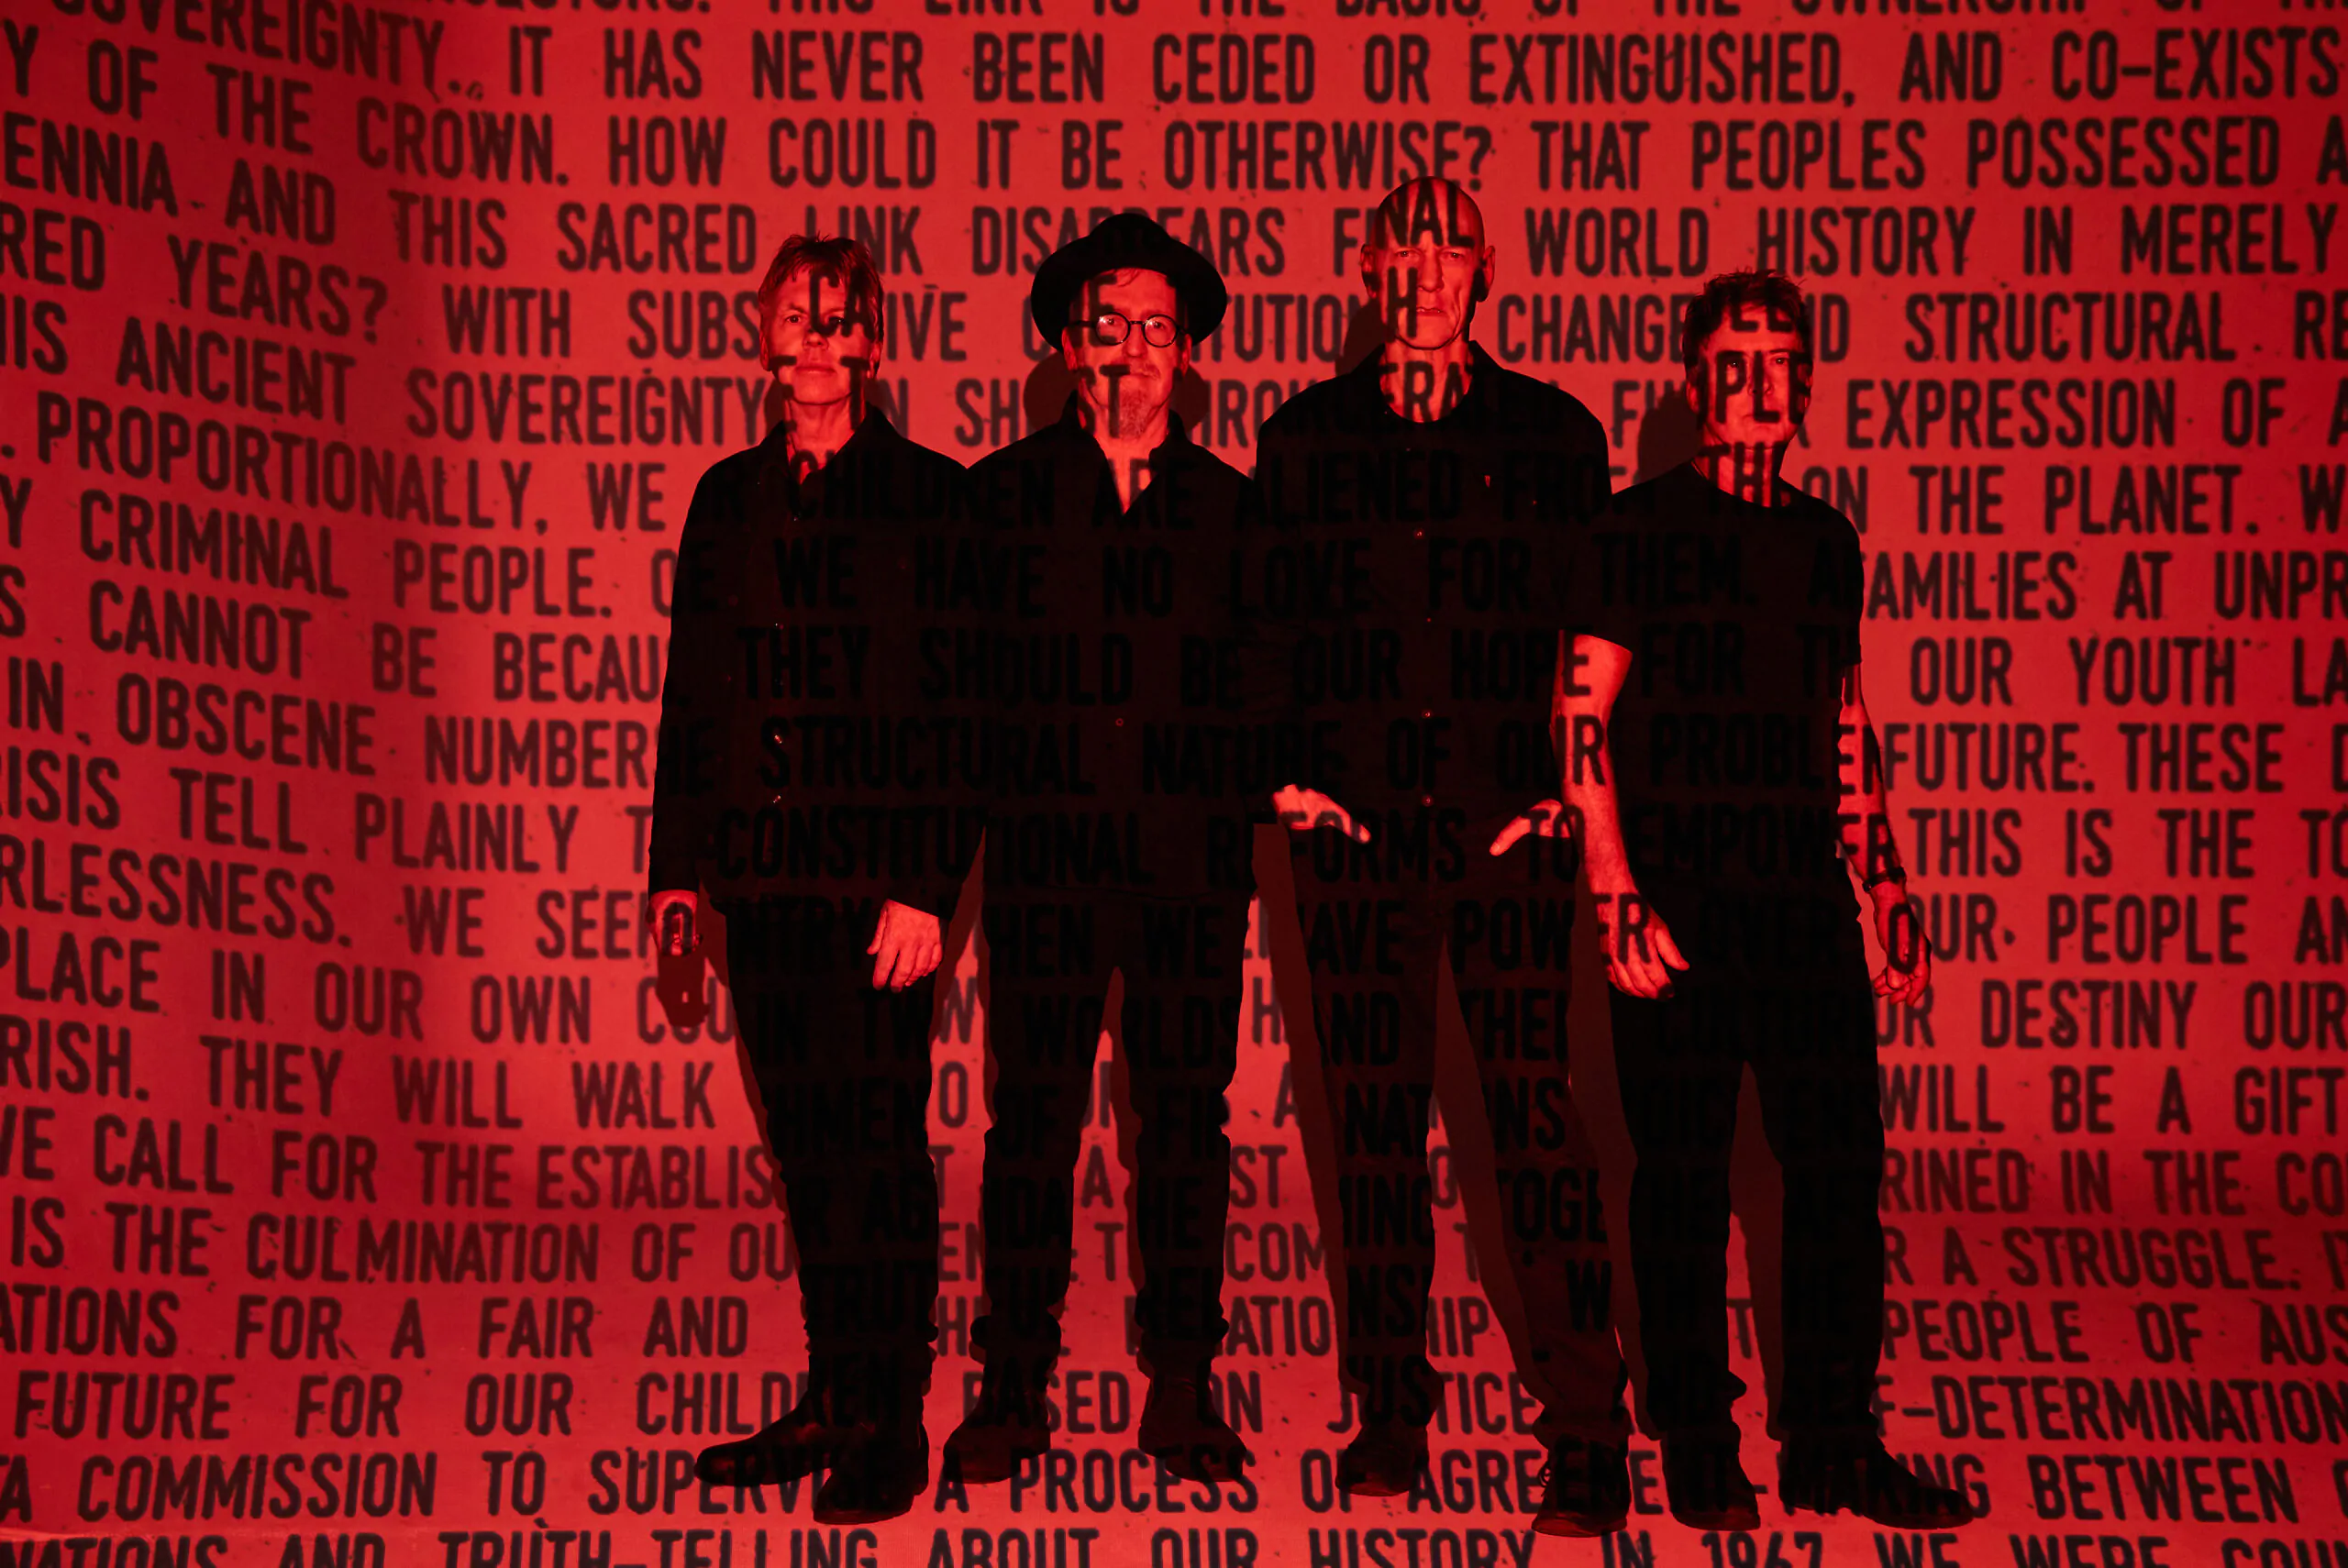 MIDNIGHT OIL announce brand new mini-album THE MAKARRATA PROJECT – out October 30th